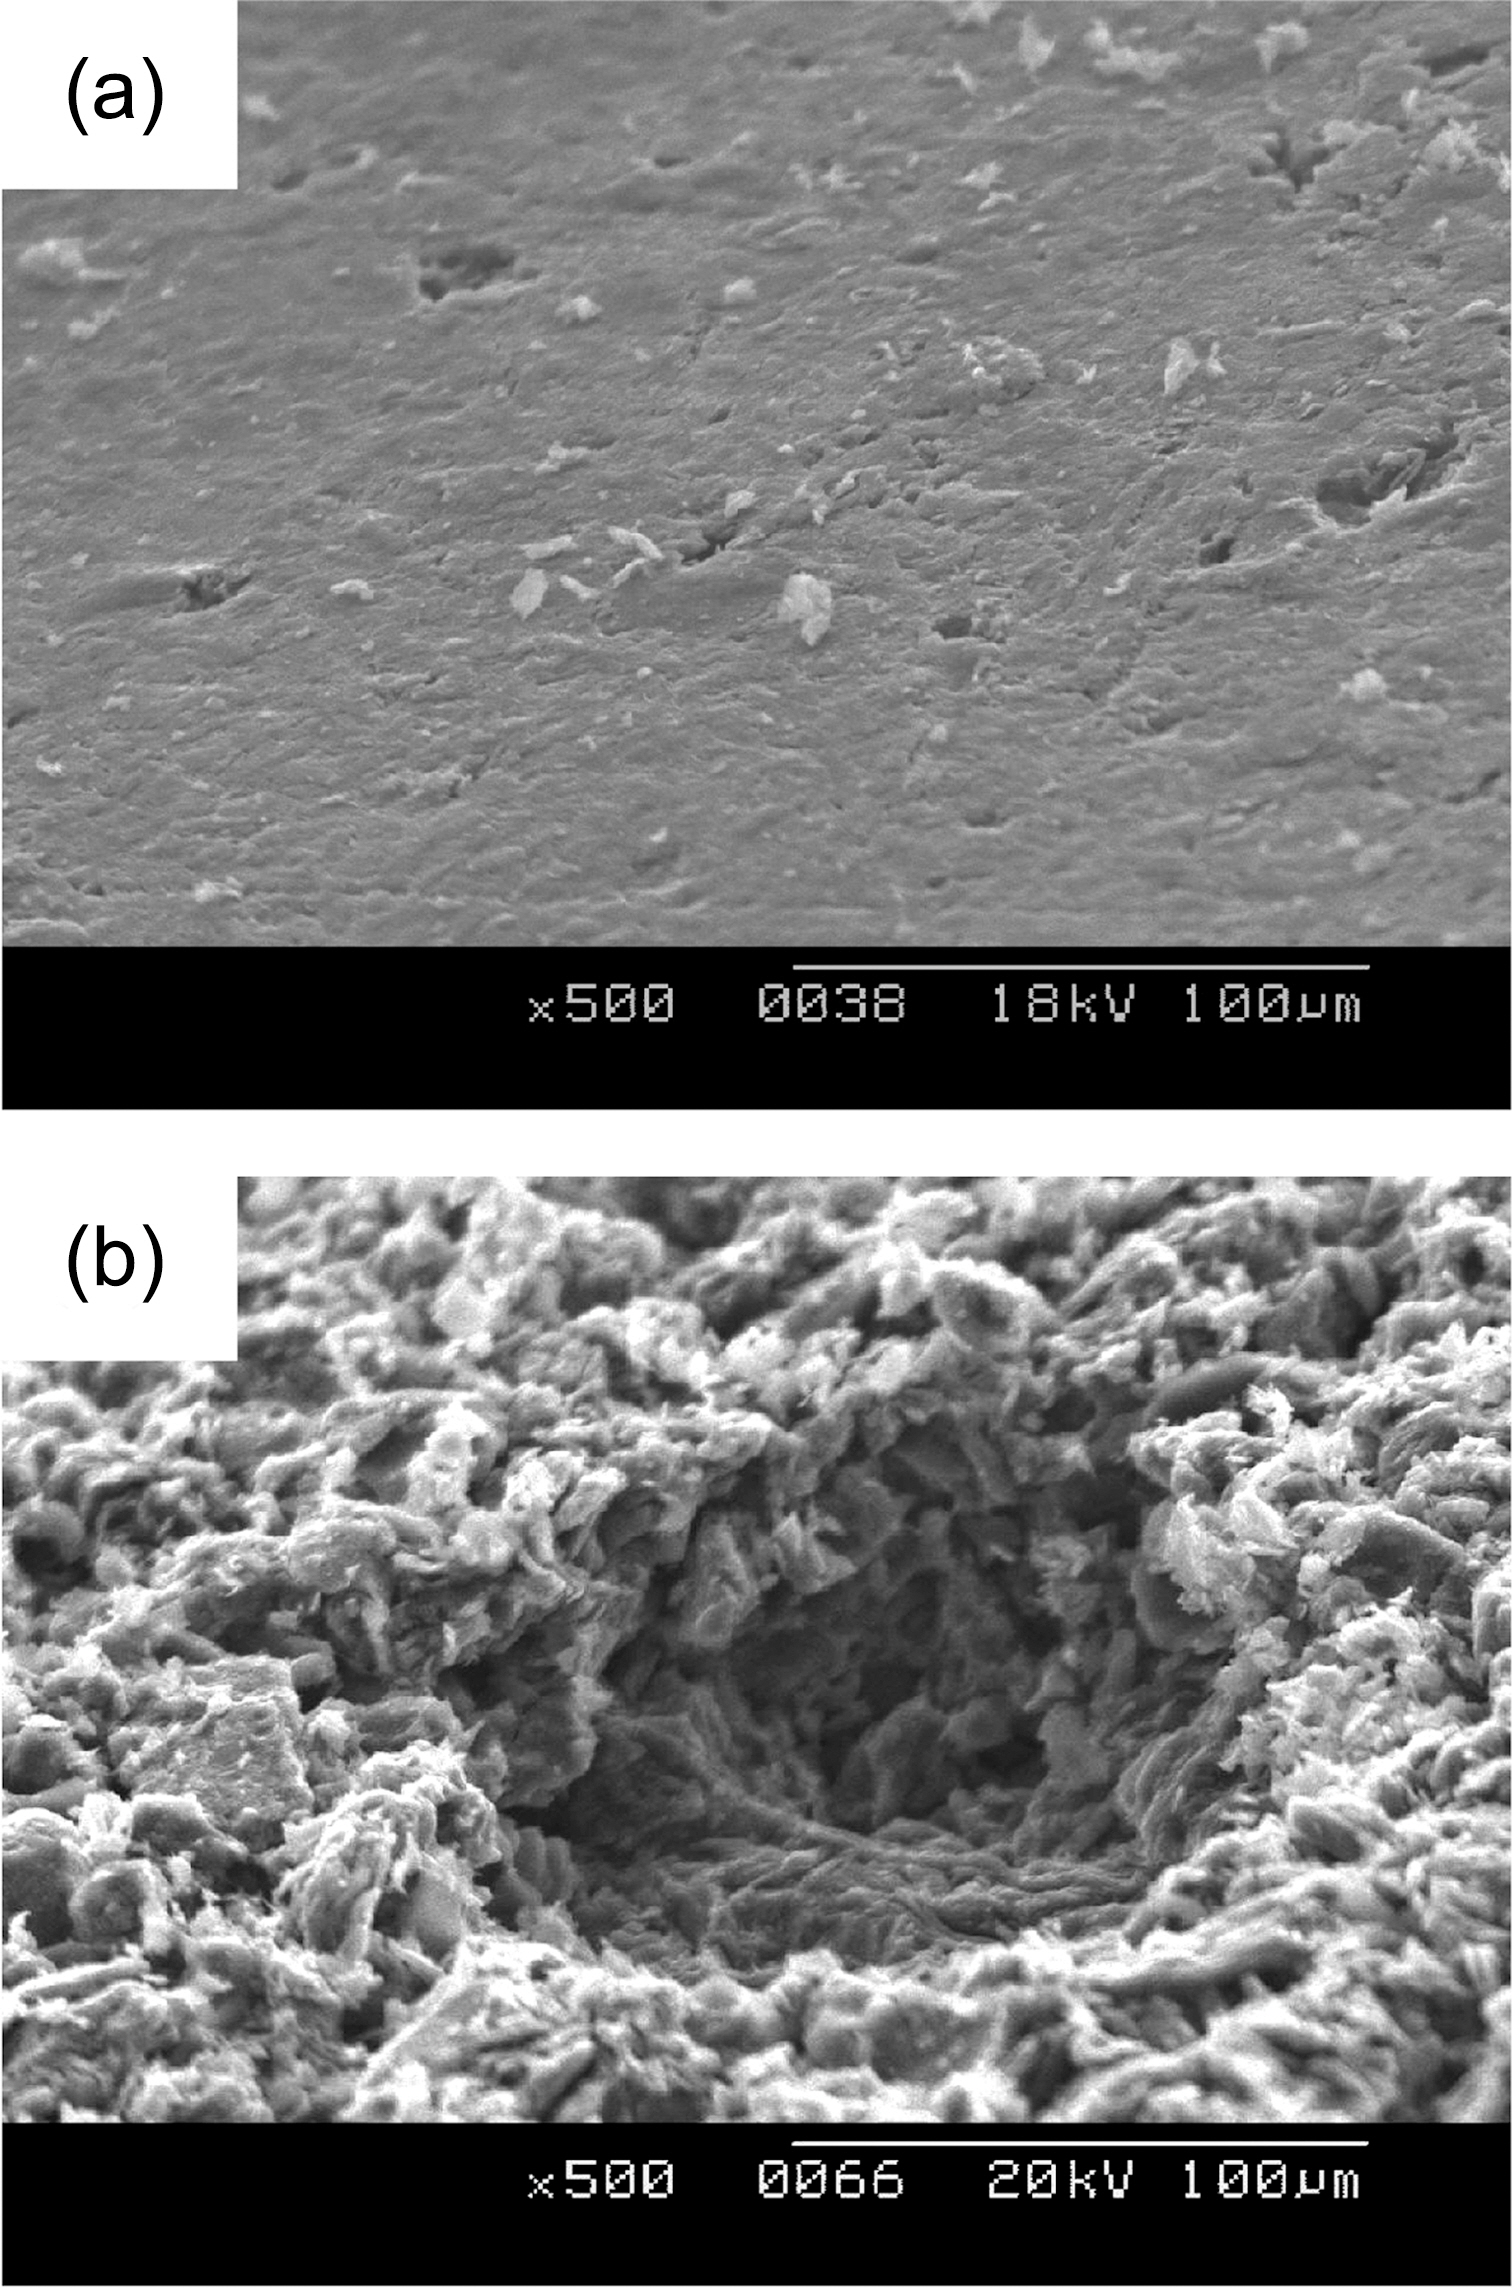 SEM micrographs (×500) showing the pore structures ofIG-430 with 0% (a) and 5% (b) weight loss respectively. SEM:scanning electron microscope.